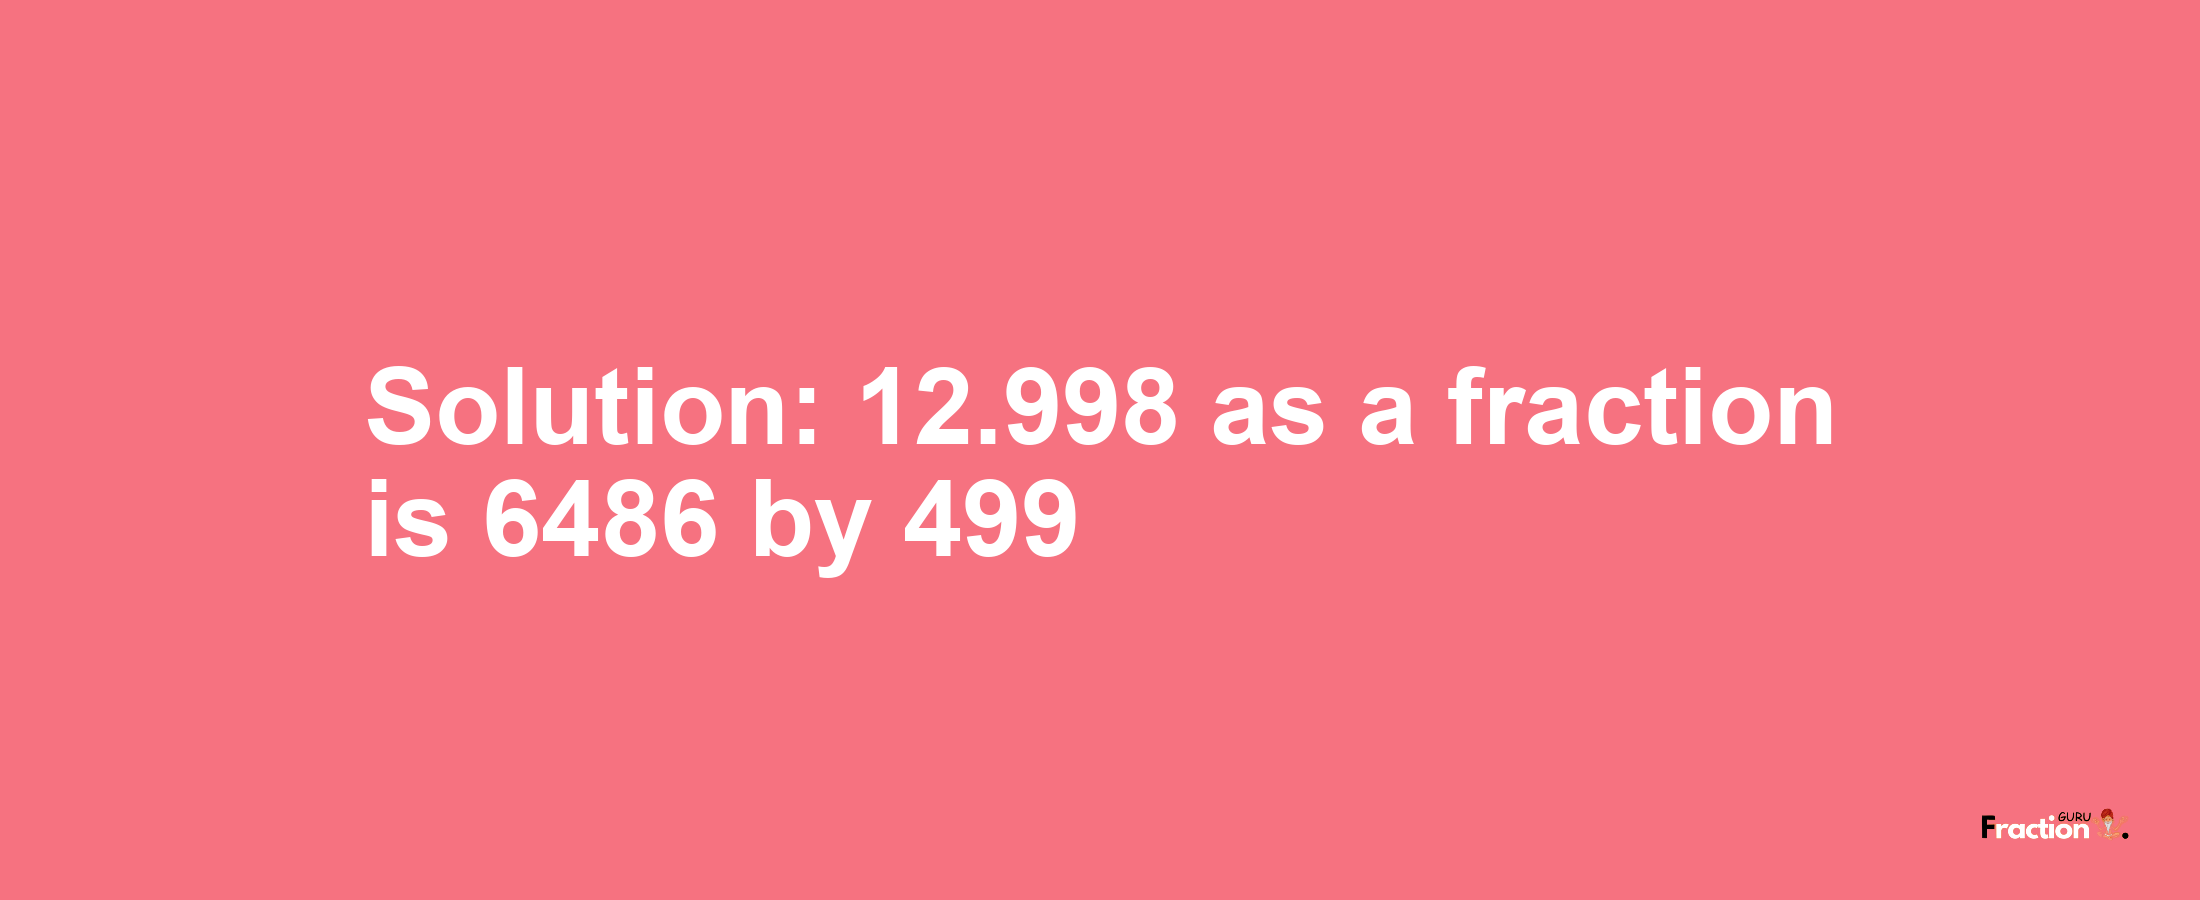 Solution:12.998 as a fraction is 6486/499